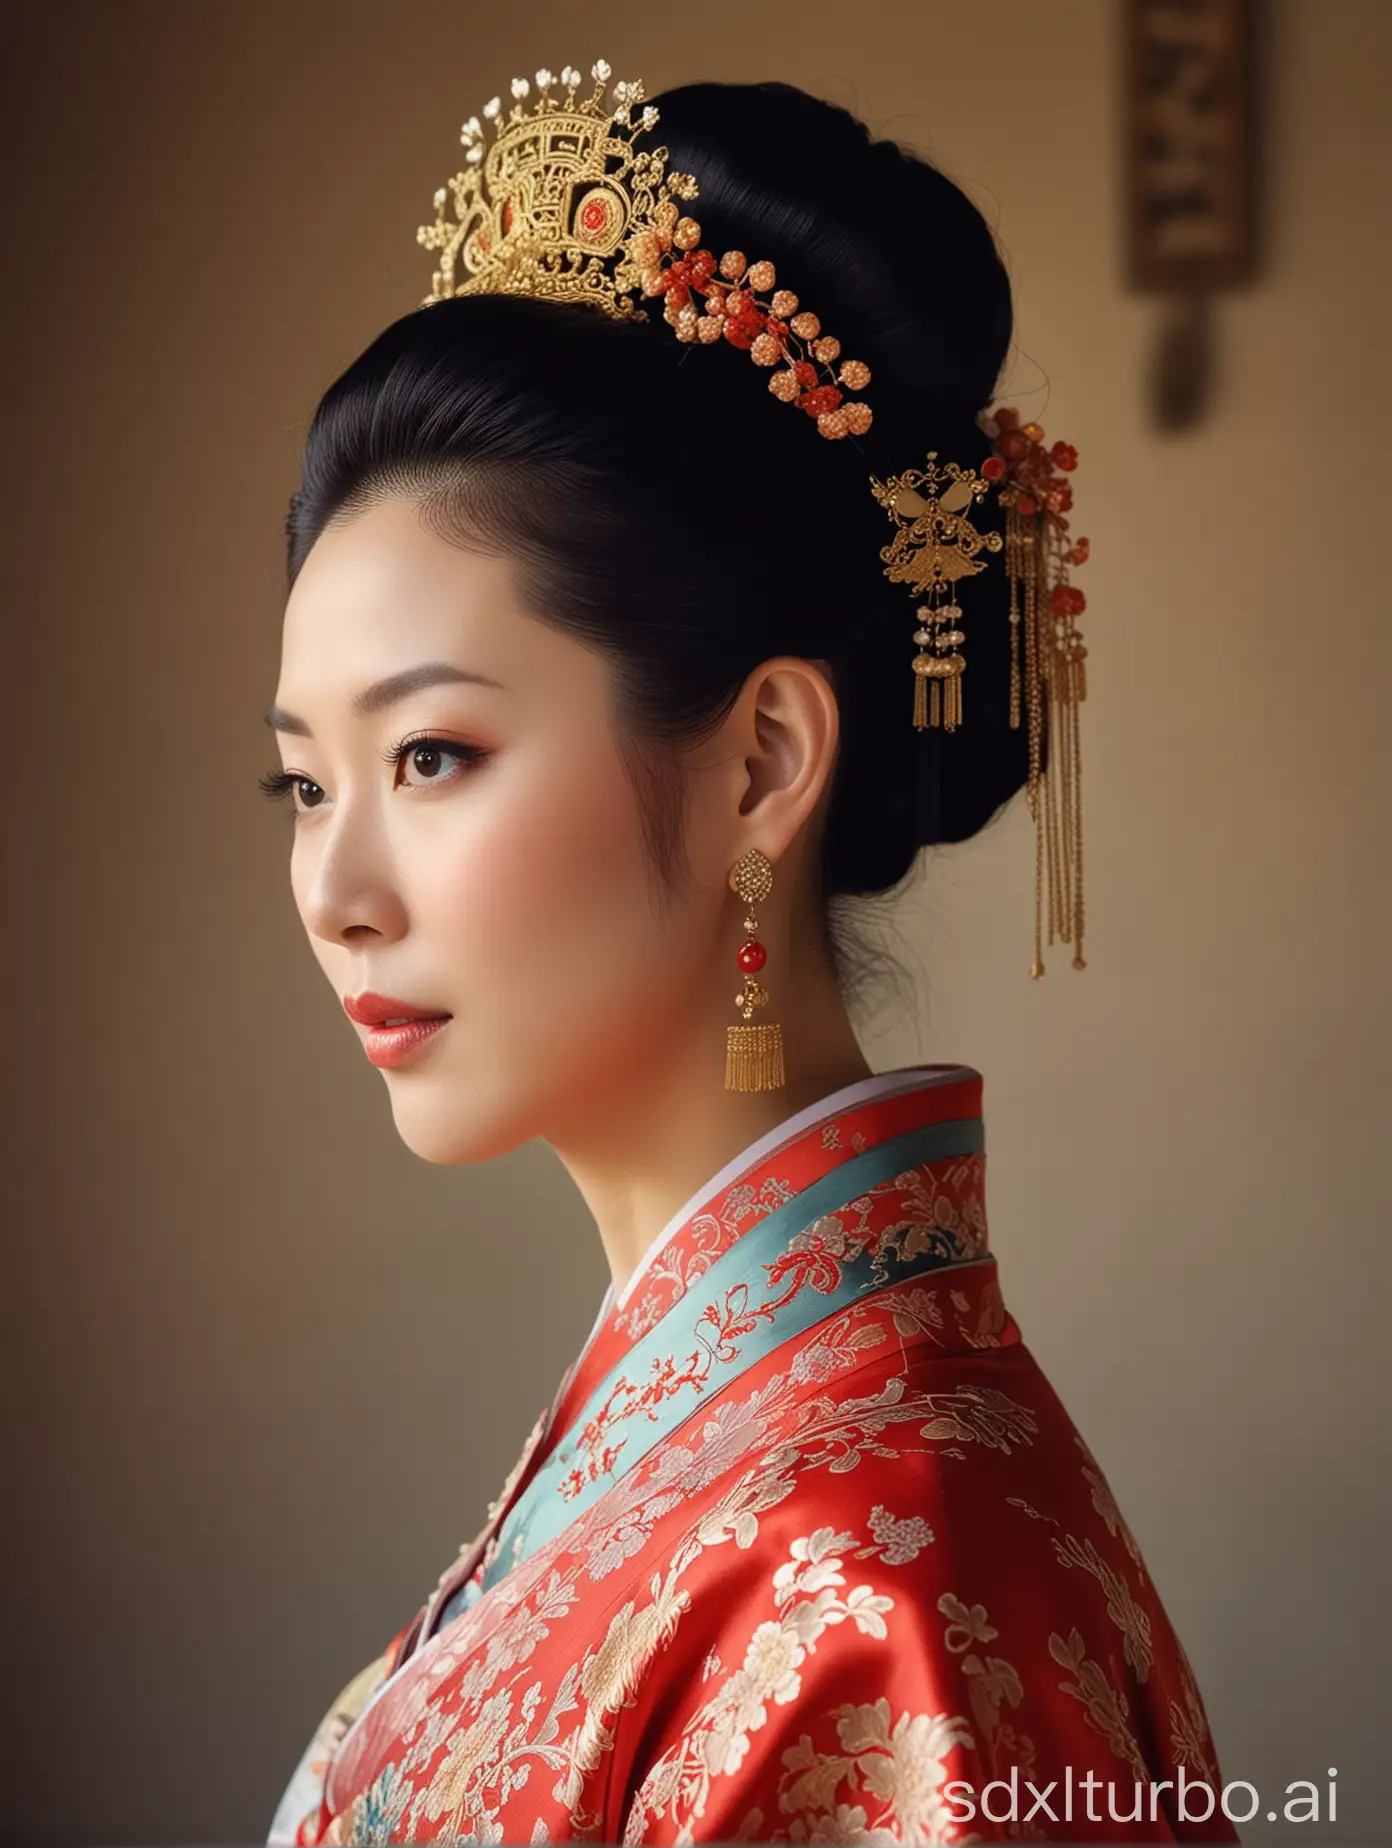 Regal-Chinese-Noblewoman-in-Traditional-Attire-with-Elegant-Hairstyle